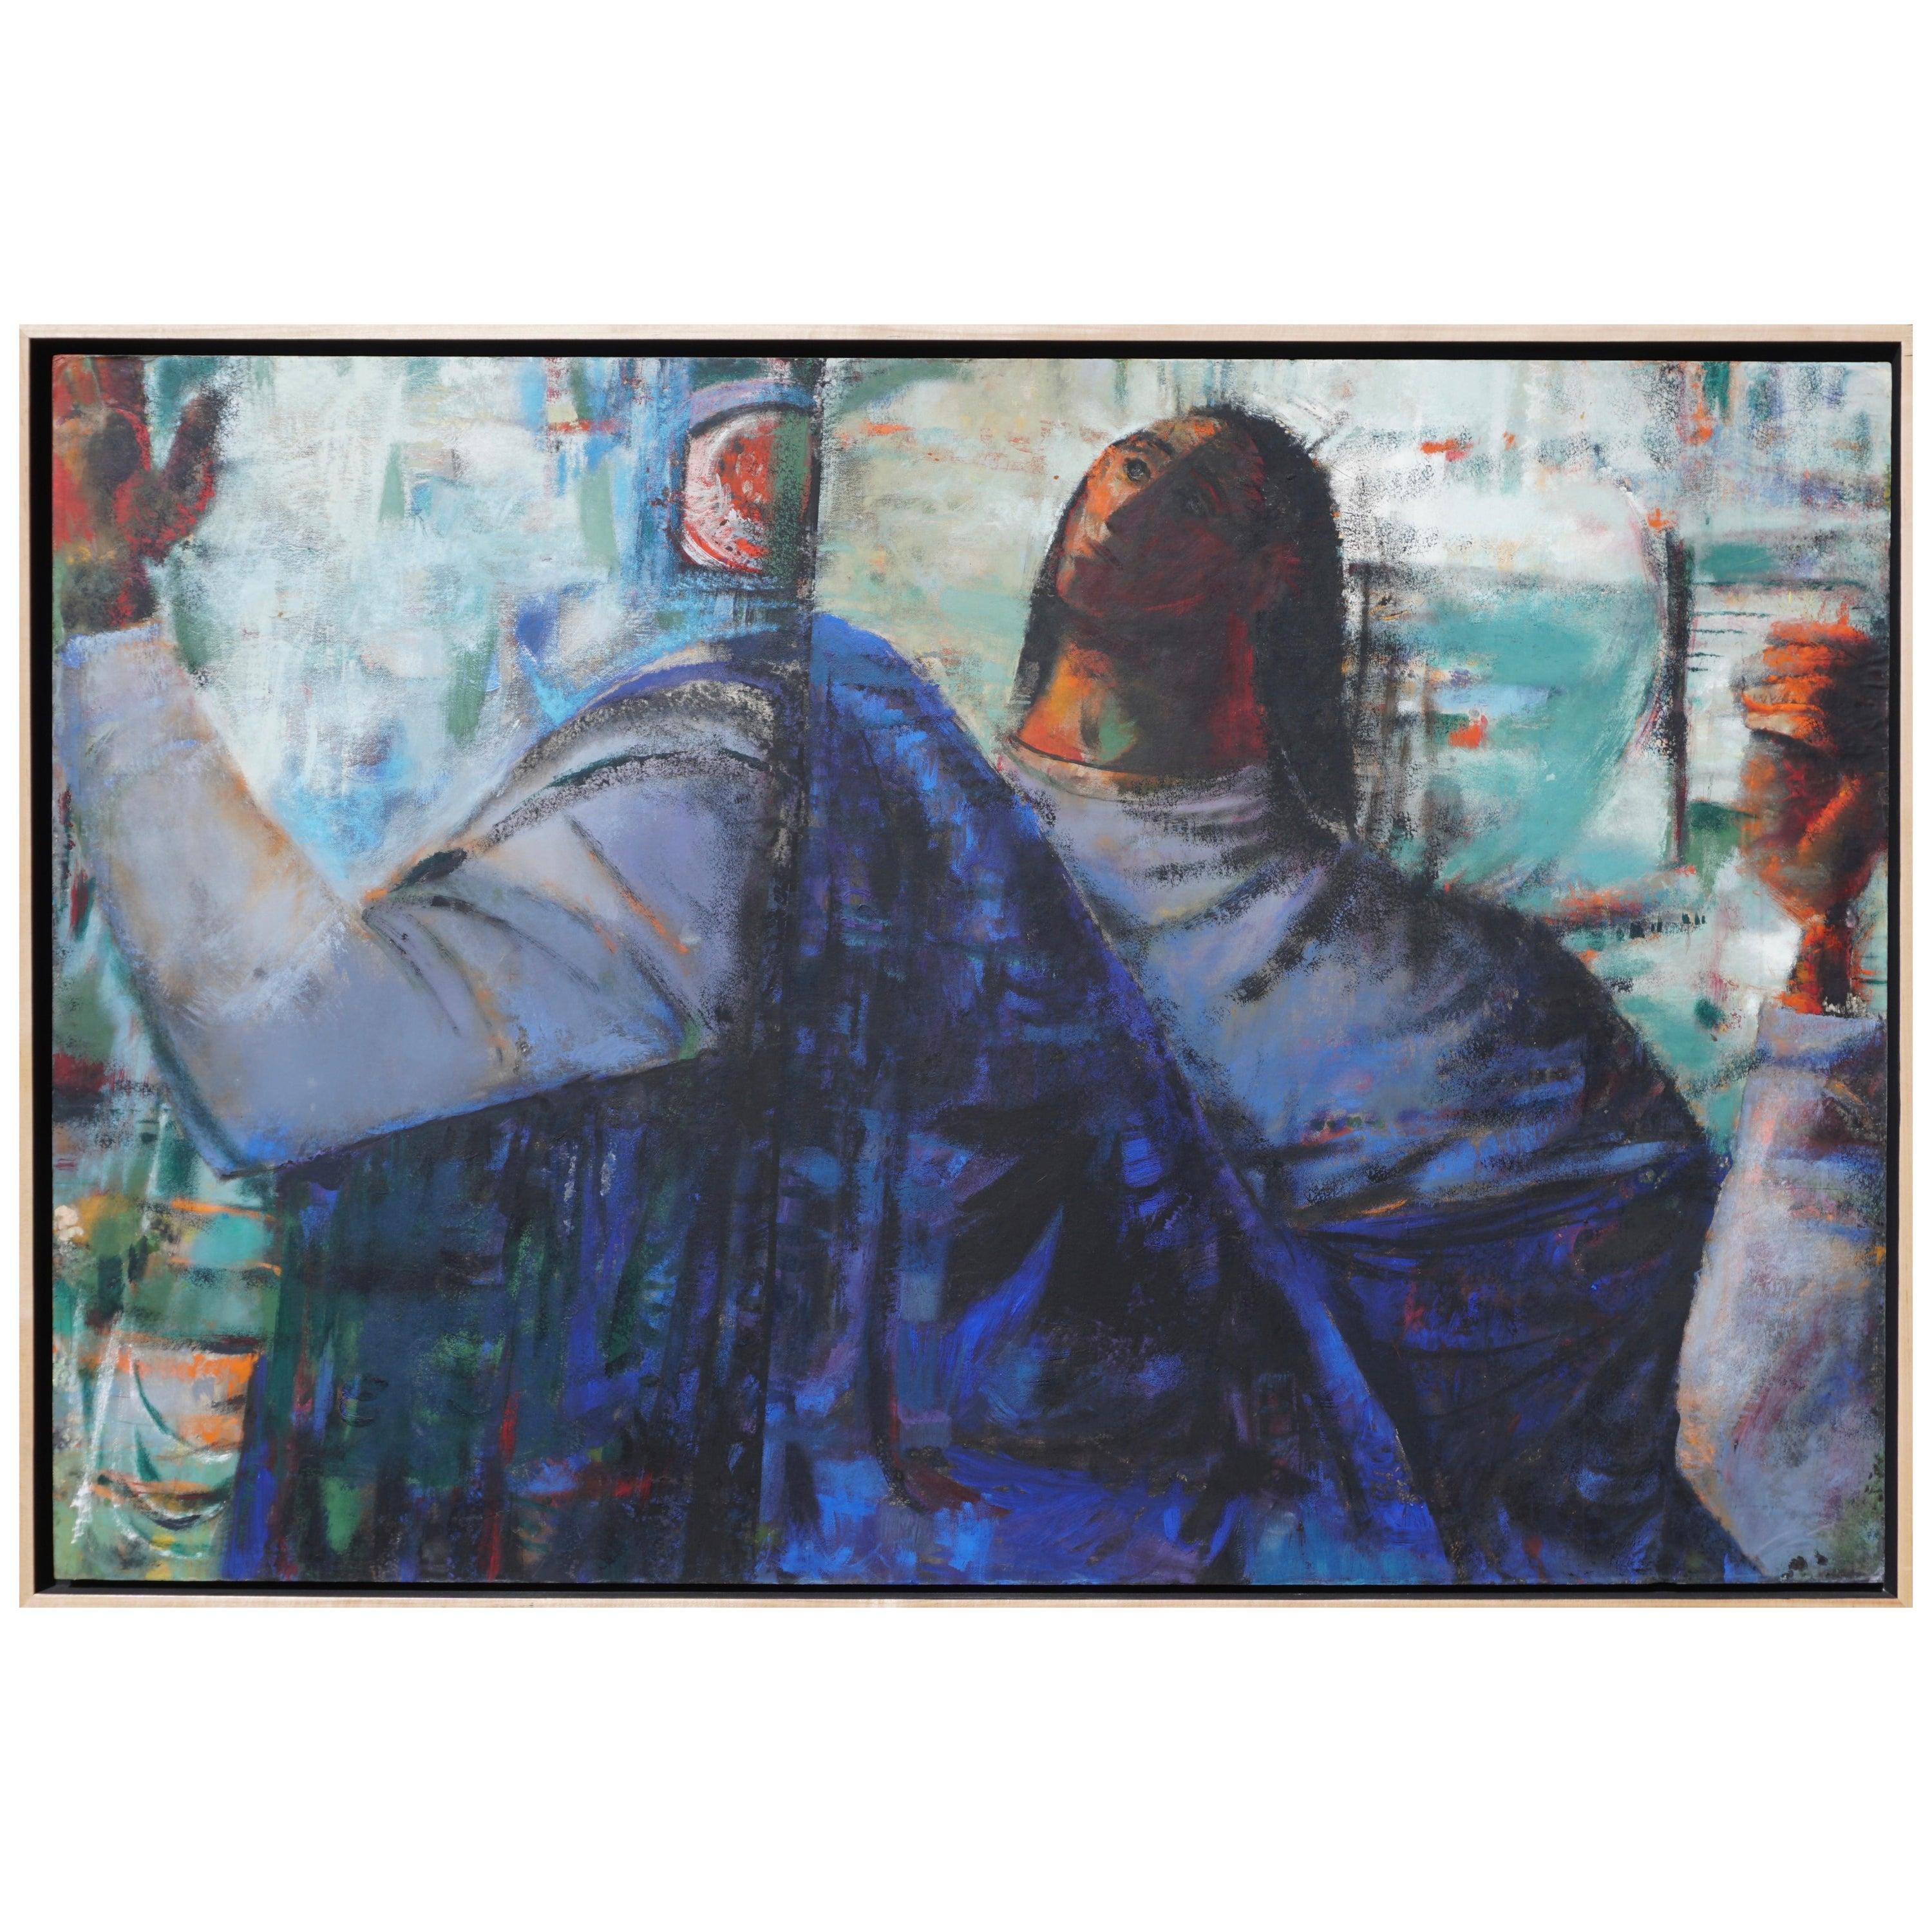 Margaret Putnam (American/Texas 1913-1989)
A Large painting "Praise" mixed media on Canvas board
Dimensions: 40 Inches High x 60 Inches Wide; Framed: 42.5 Inches High x 62.5 Inches Wide. 
Condition: Original condition. Some wear to frame with